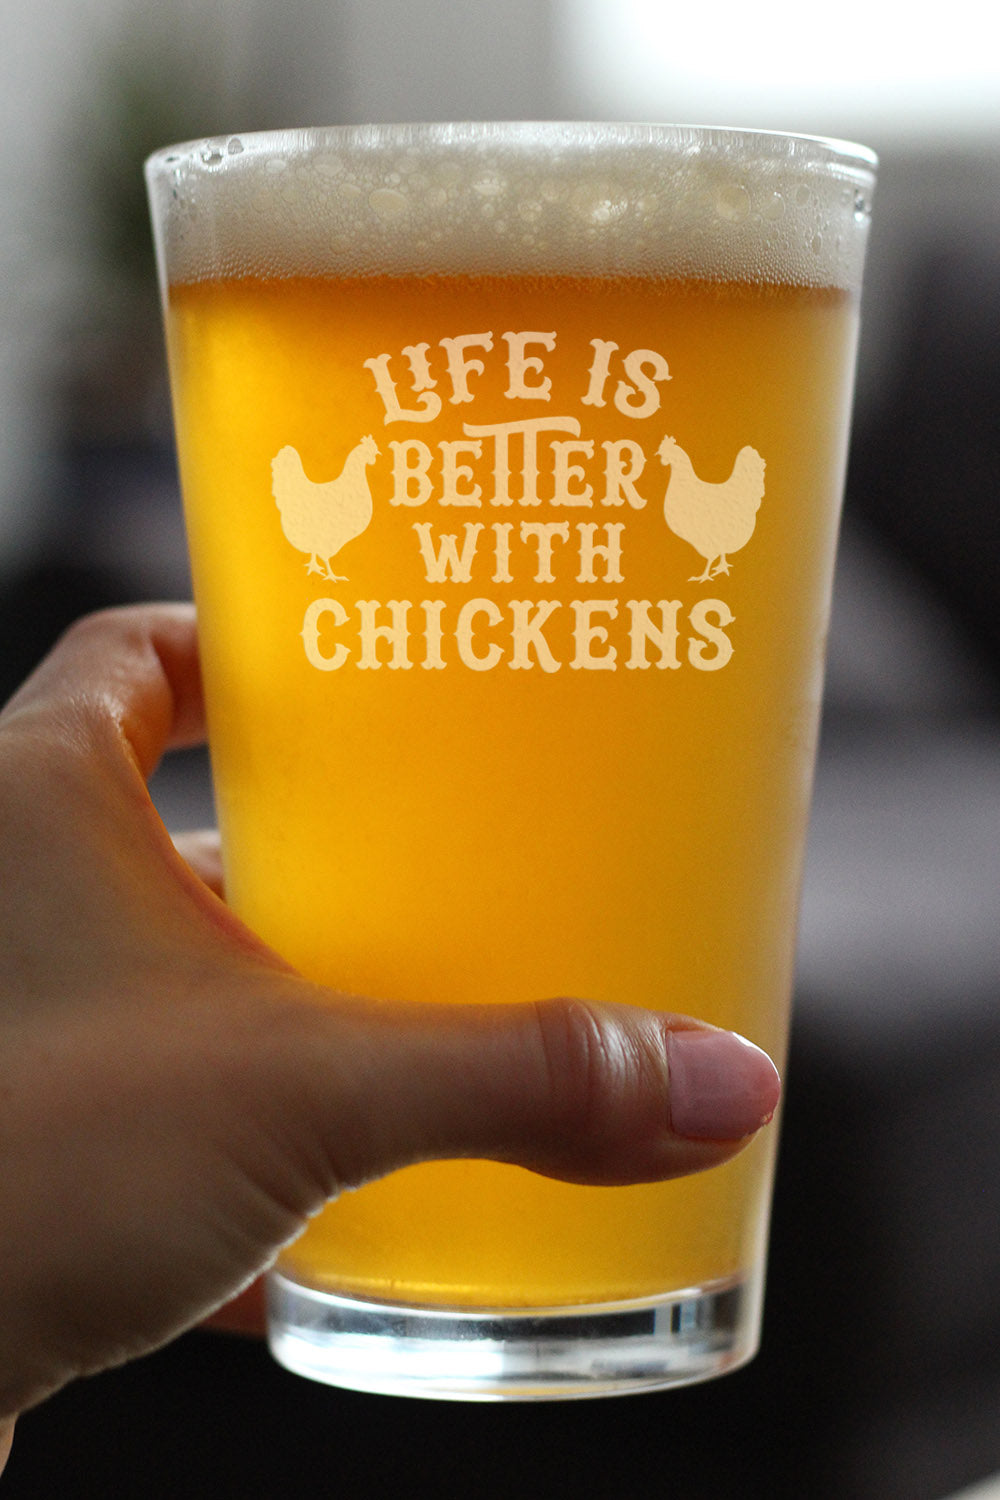 Life is Better with Chickens - 16 oz Pint Glass for Beer - Funny Chicken Gifts for Men &amp; Women - Unique Drinking Decor